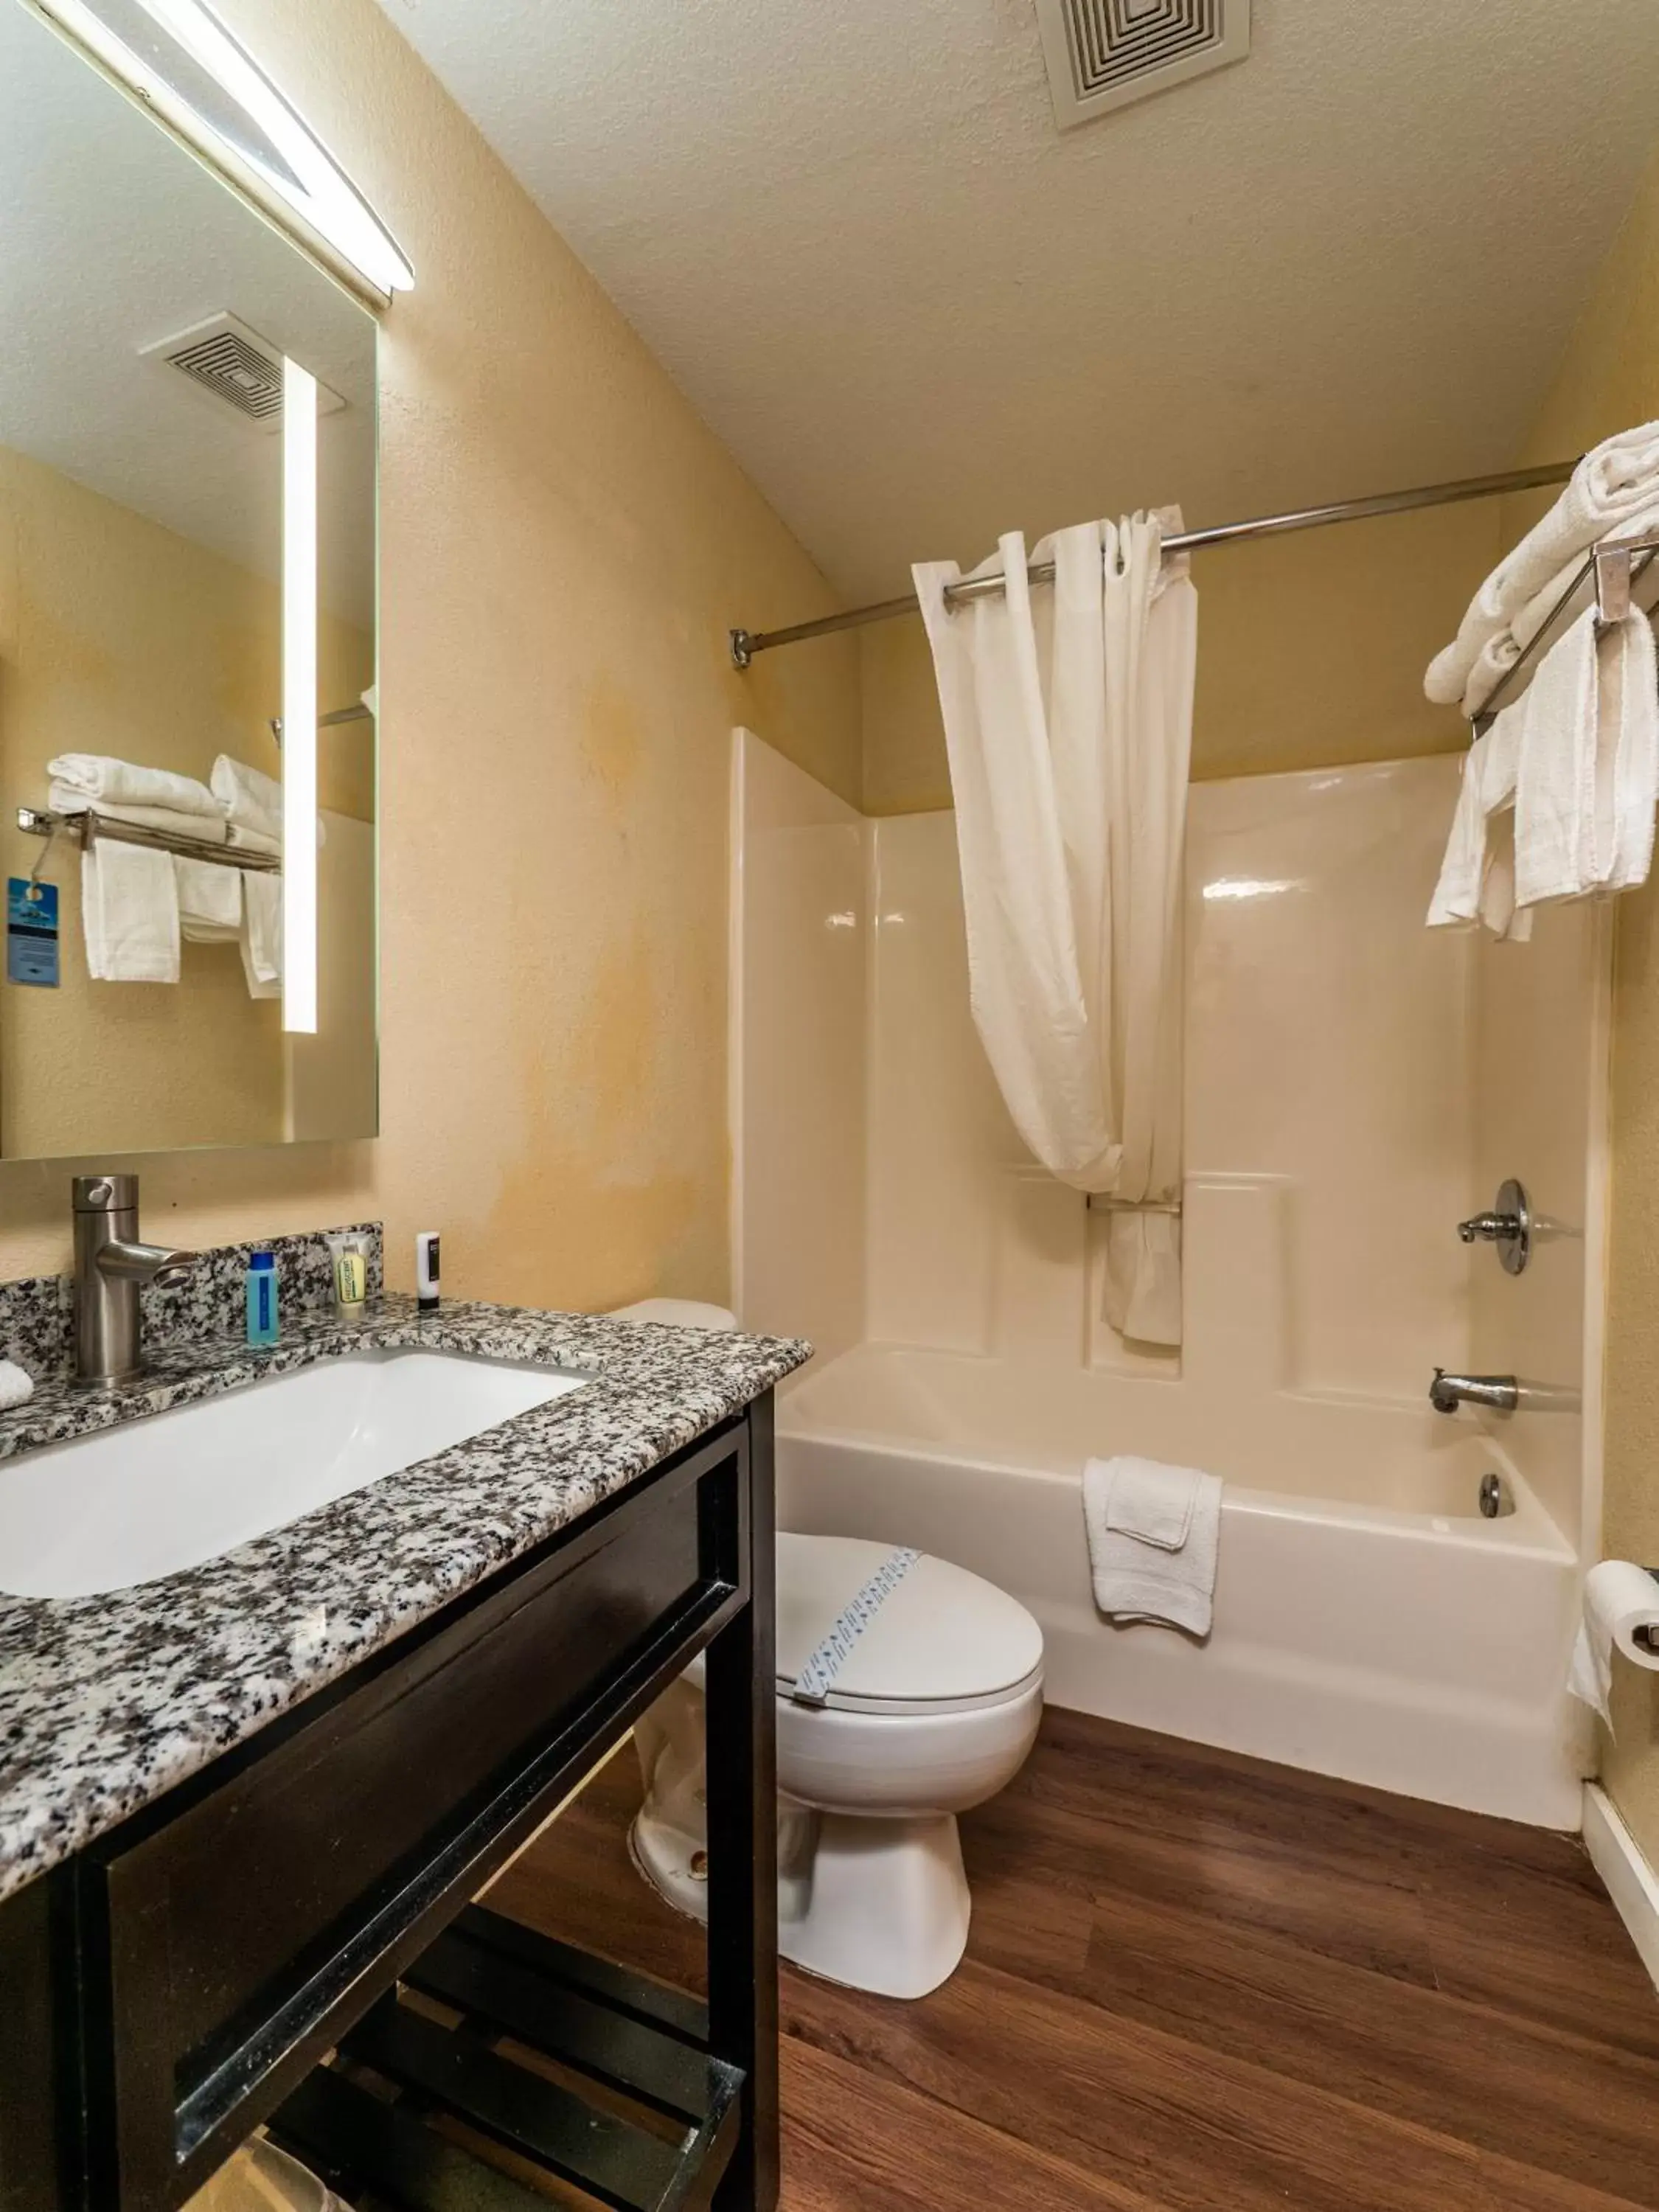 Shower, Bathroom in Microtel Inn and Suites Ocala